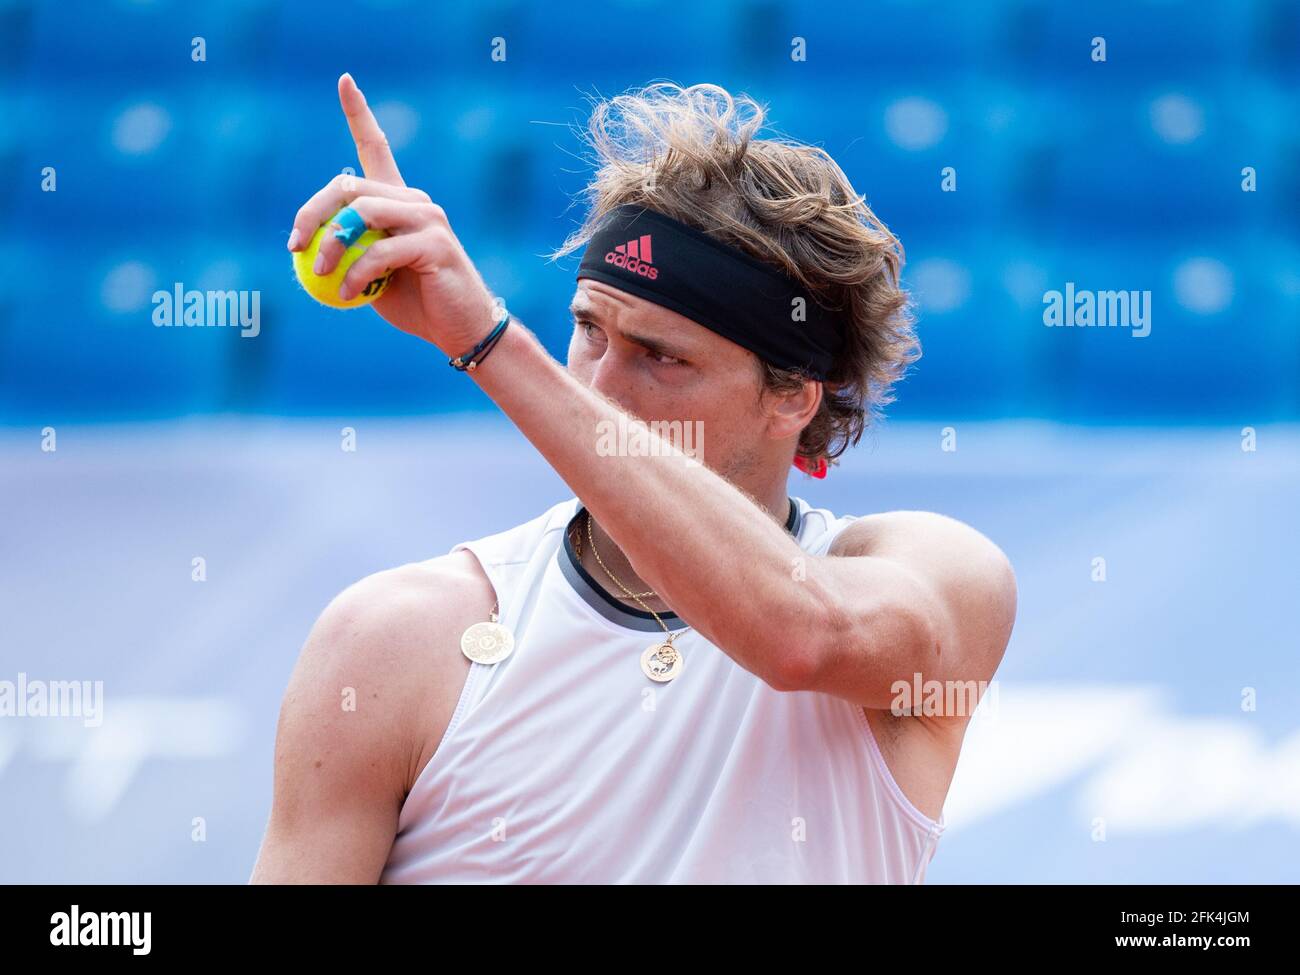 Munich, Germany. 28th Apr, 2021. Tennis: ATP Tour, Singles, Men, 2nd Round.  Zverev (Germany) - Berankis (Lithuania). Alexander Zverev gestures after  the match. Credit: Sven Hoppe/dpa/Alamy Live News Stock Photo - Alamy